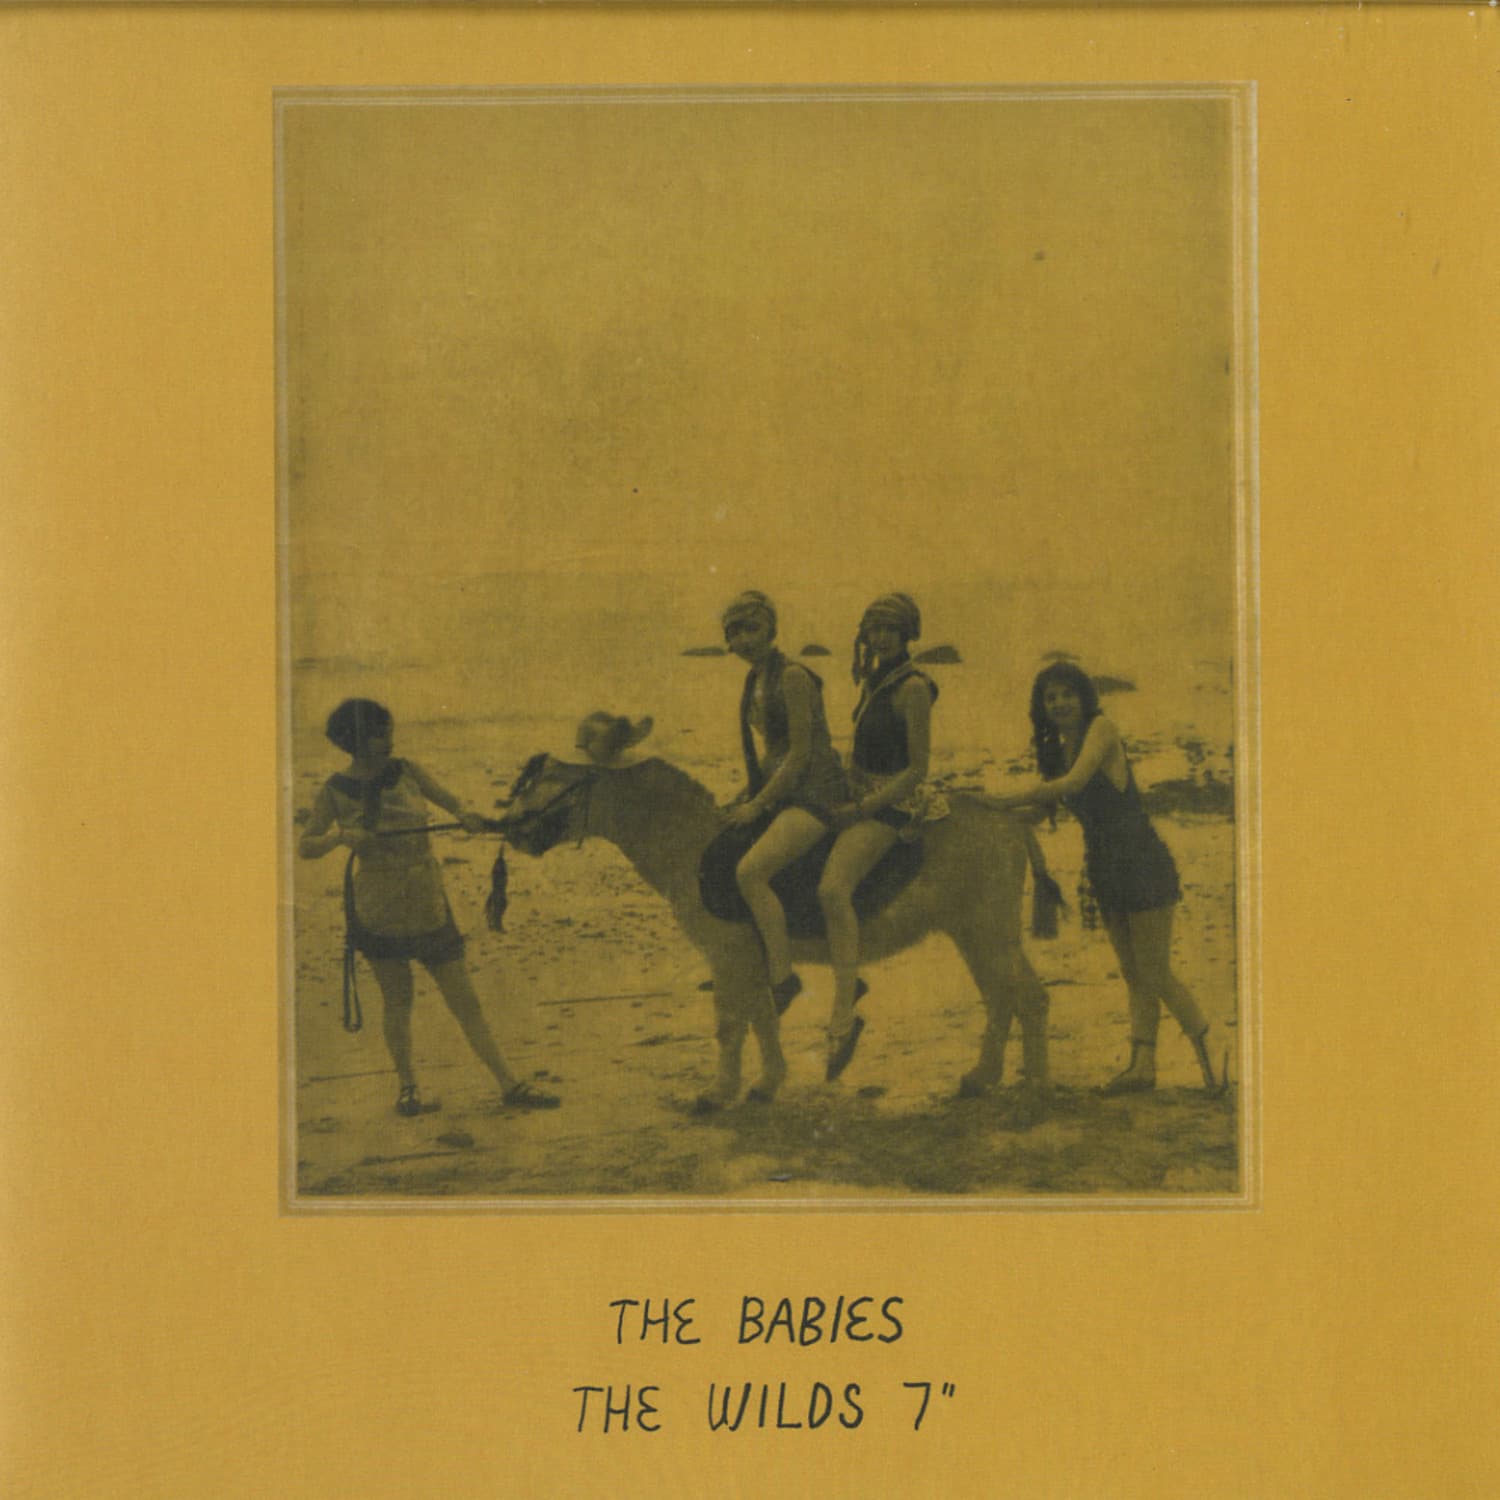 The Babies - THE WILDS 